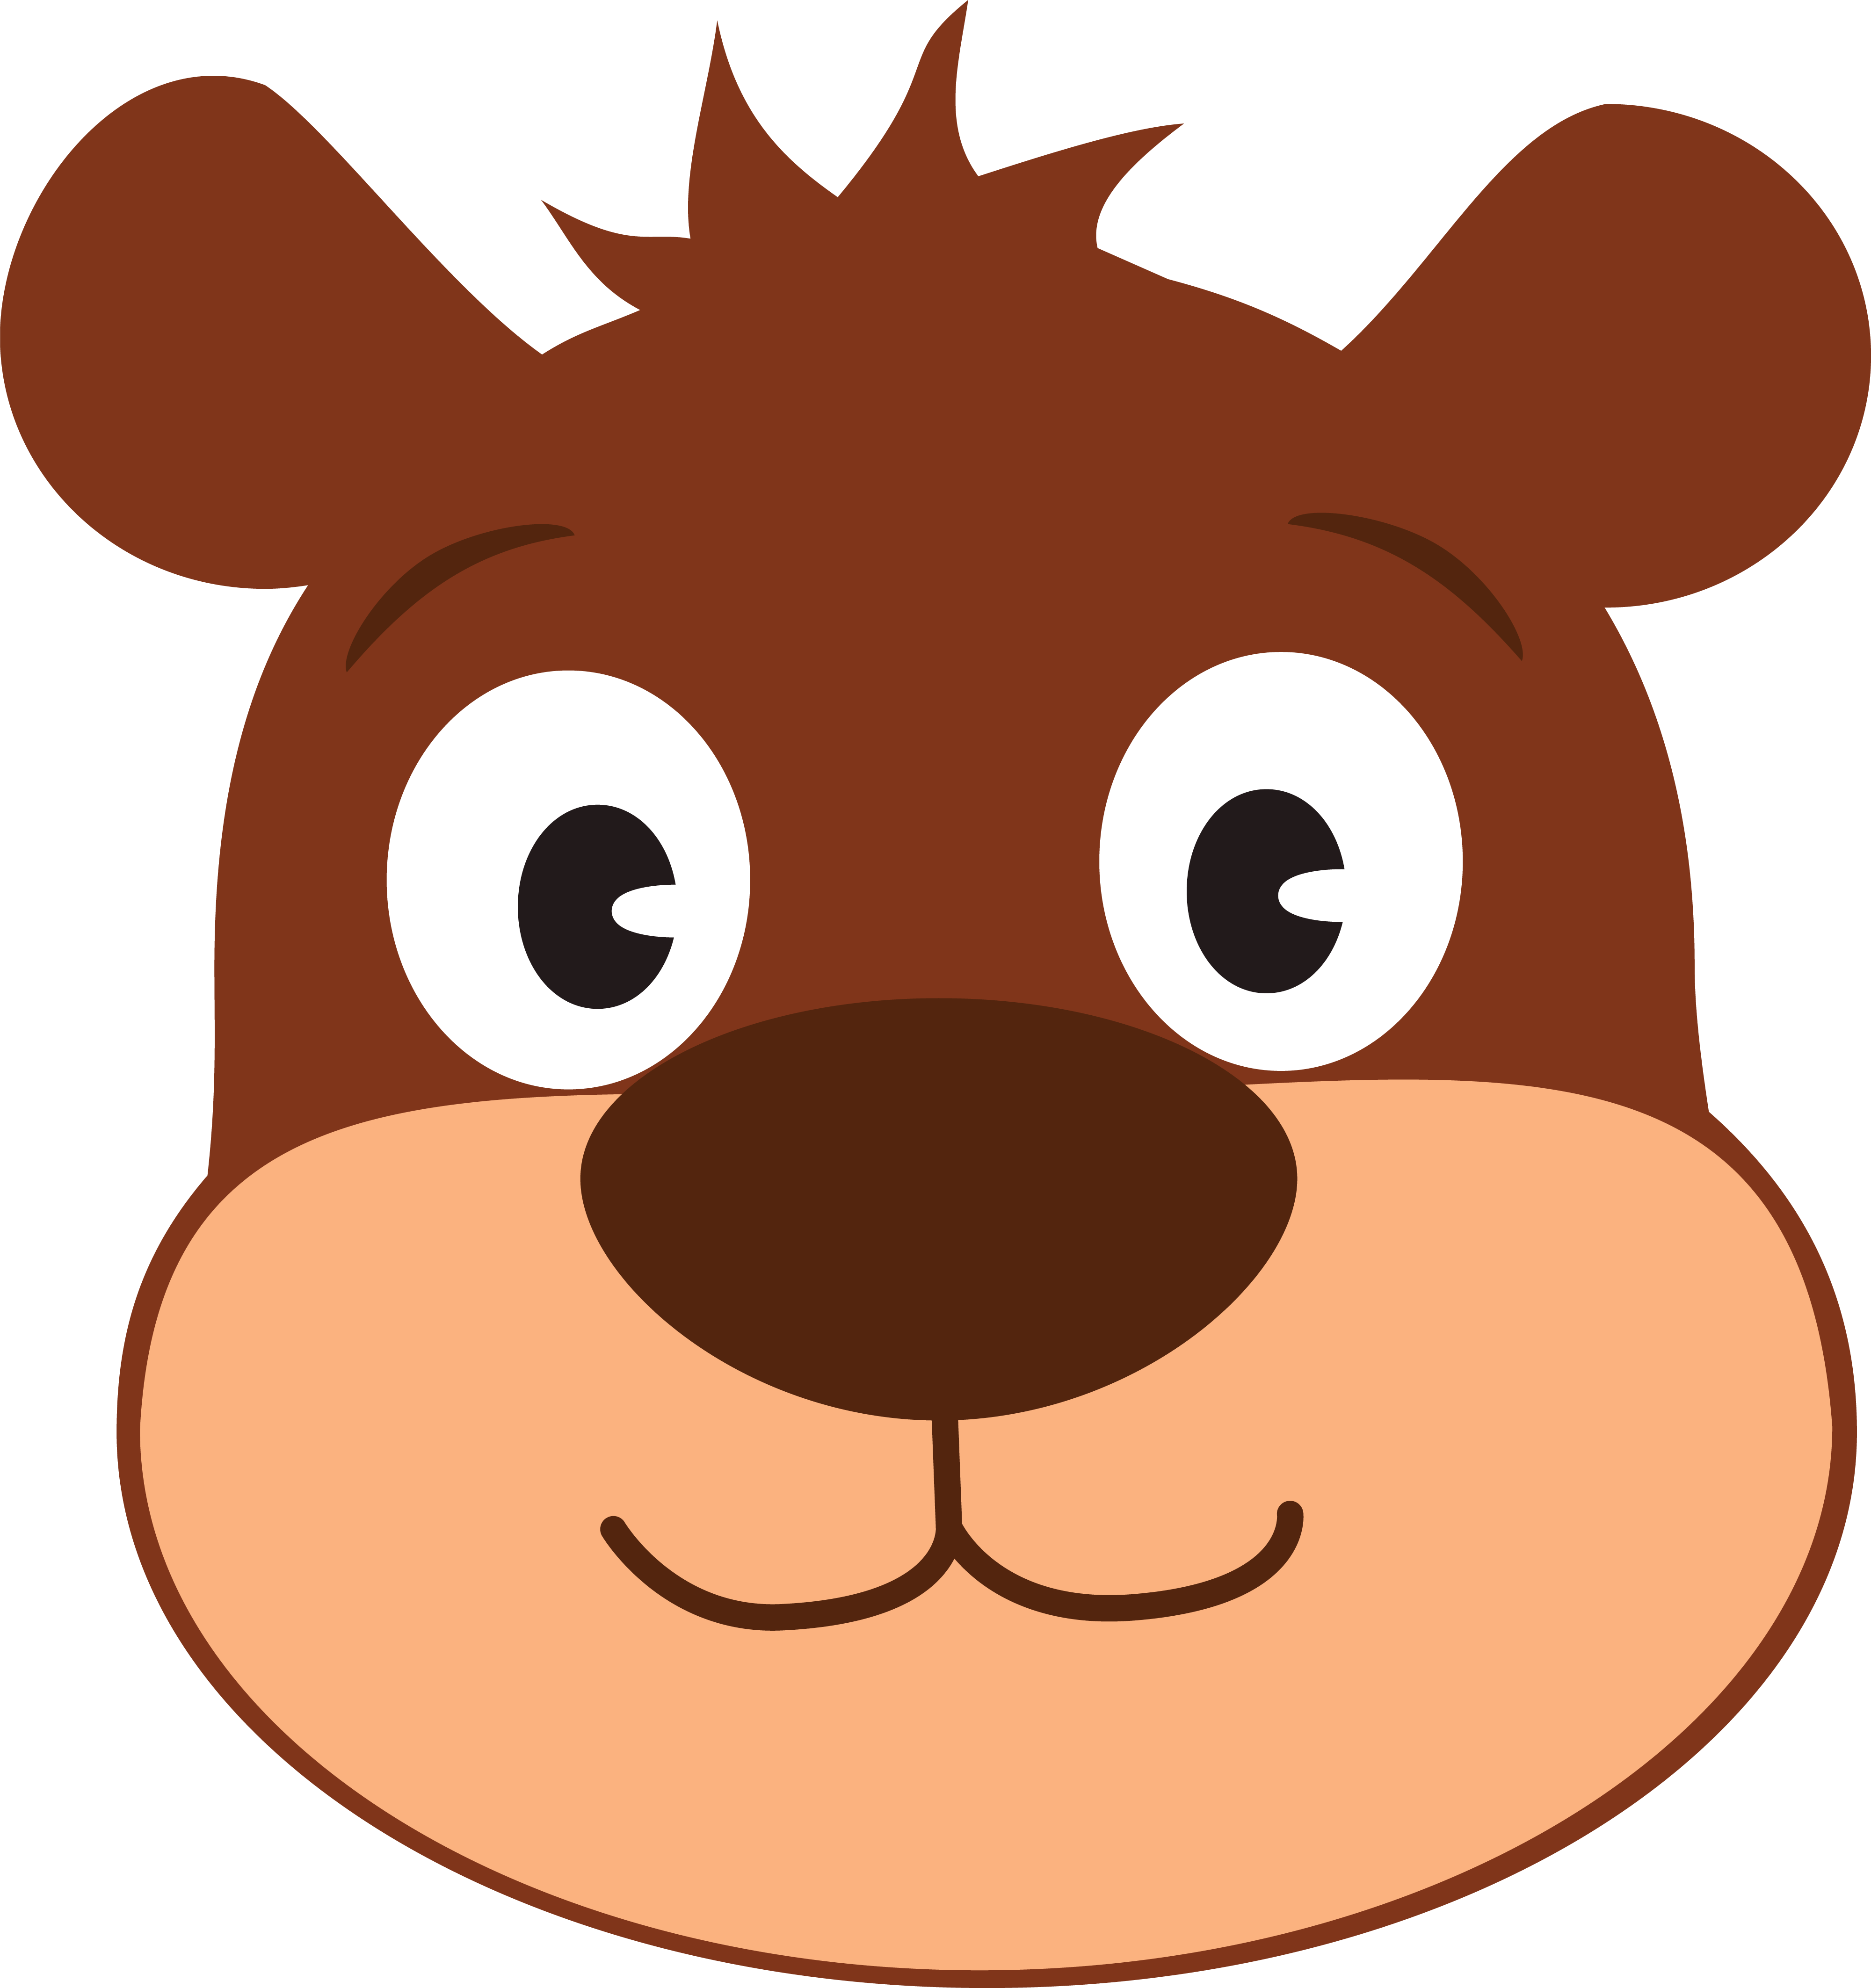 Bear at getdrawings com. Friendly clipart friendly face